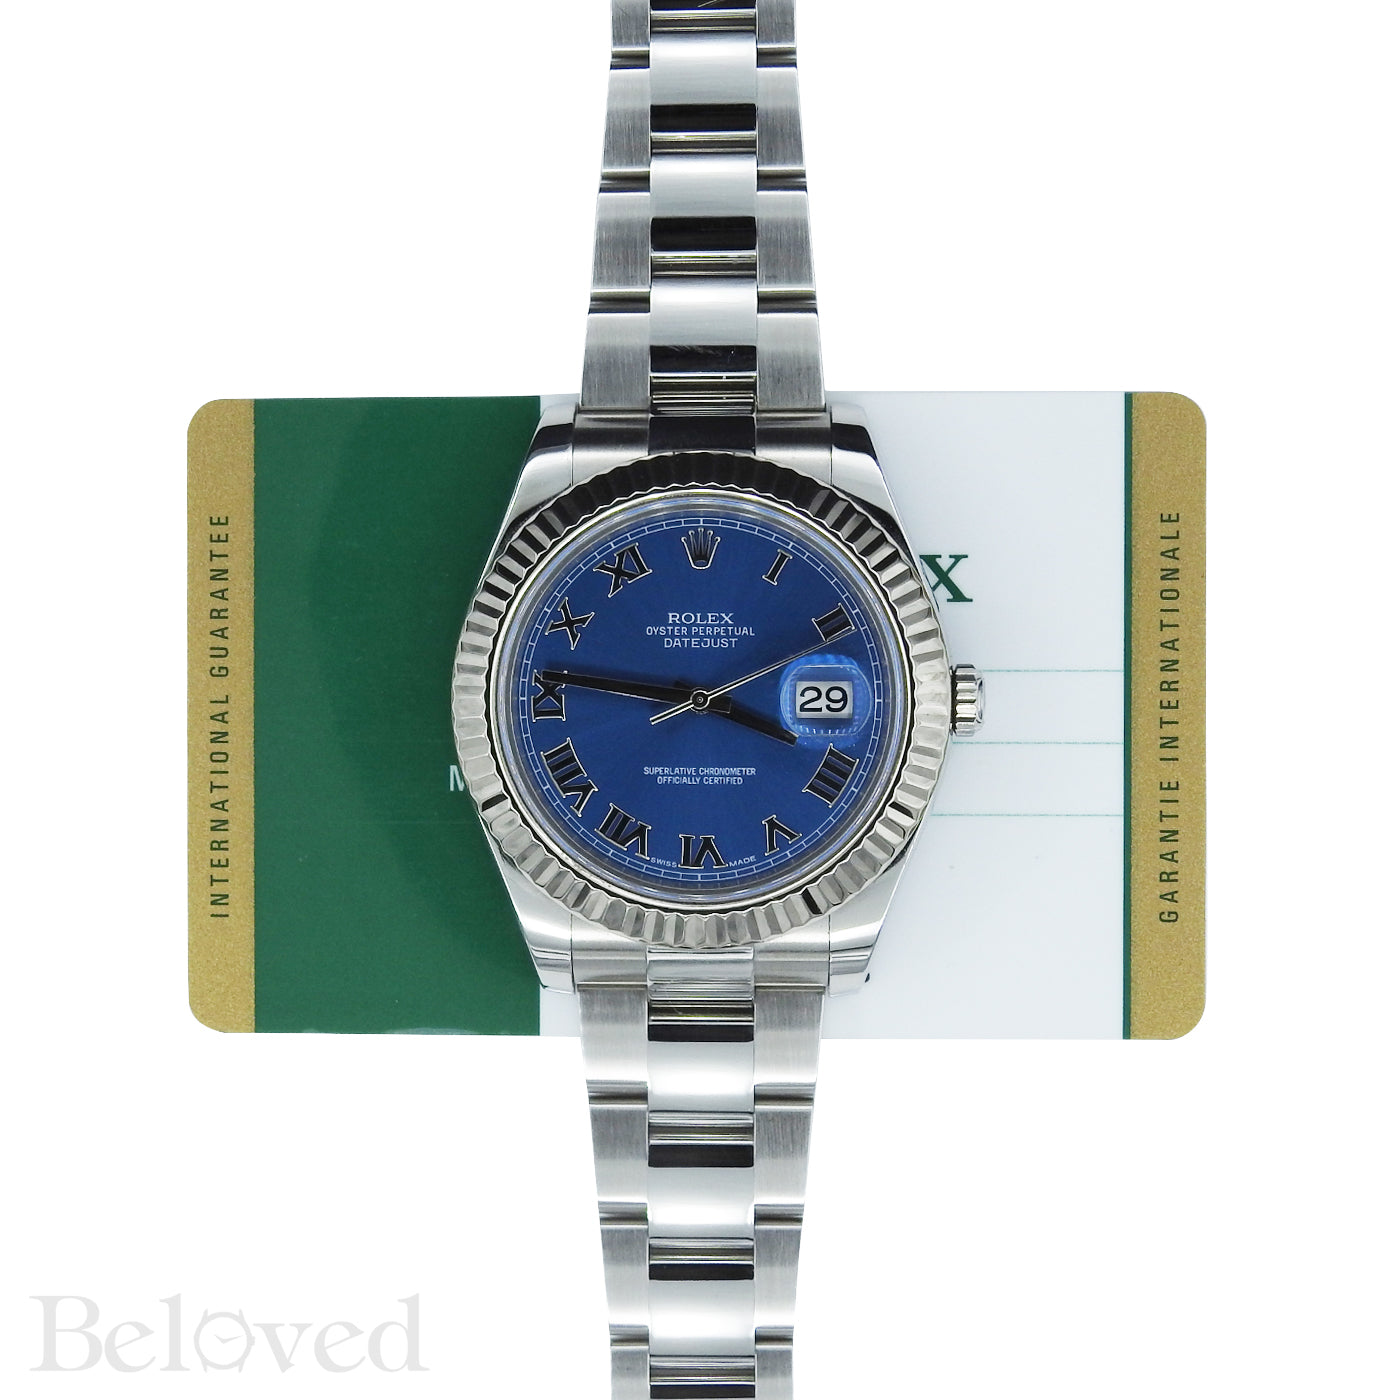 Rolex Datejust II 116334 Blue Roman Dial with Five Year Warranty Card and Rolex Box Image 2